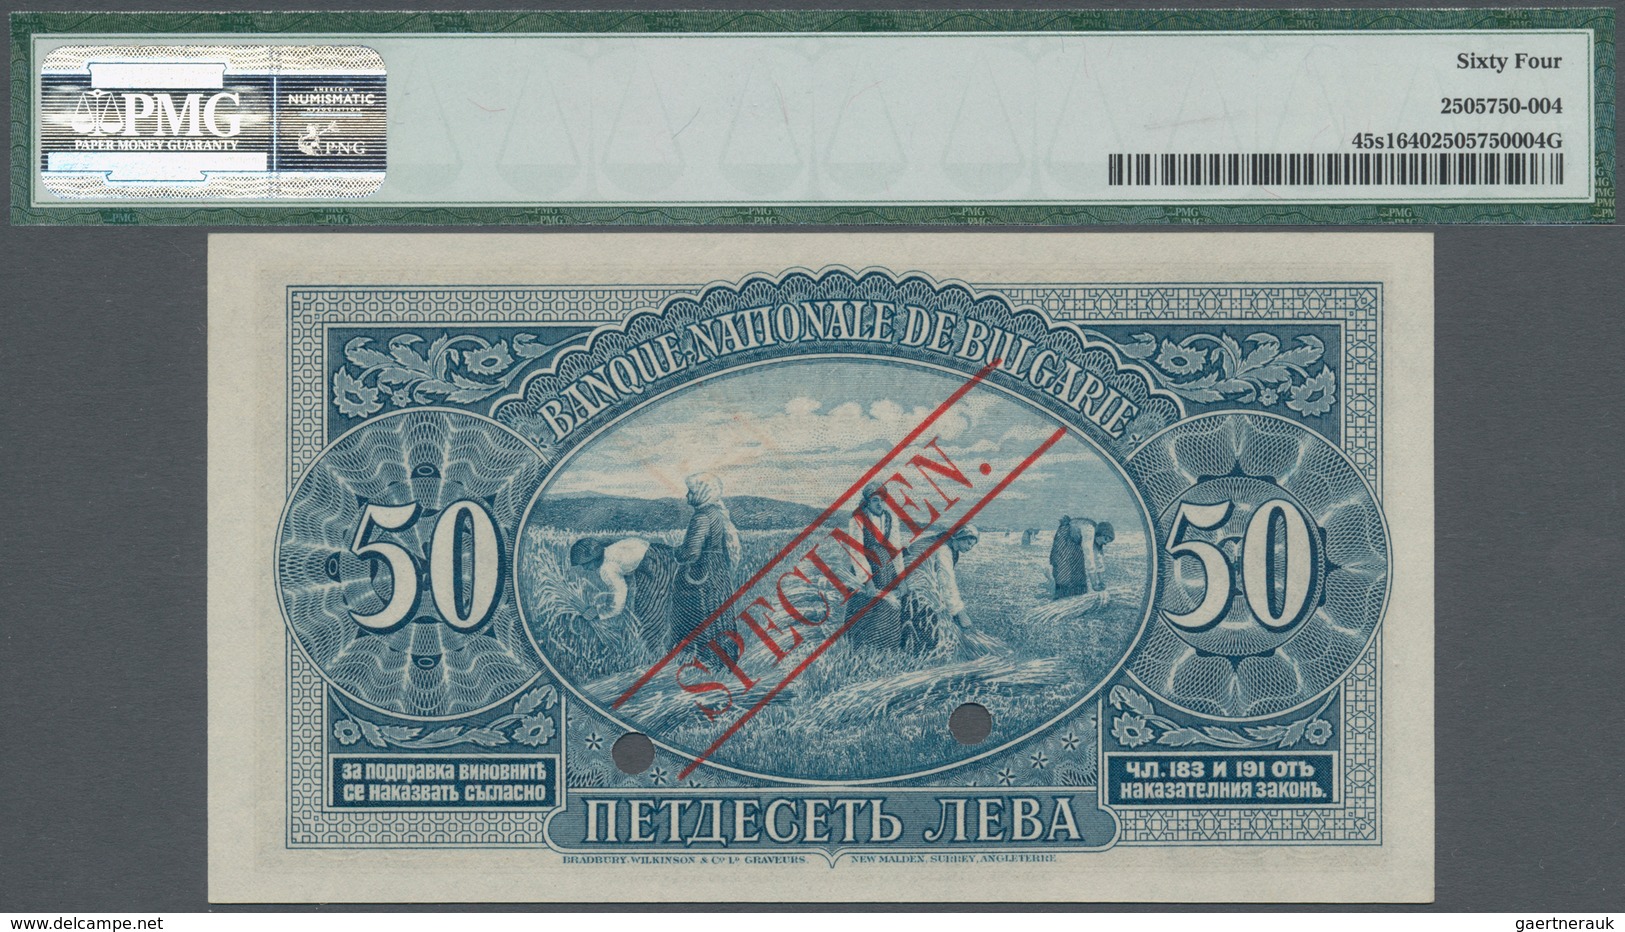 Bulgaria / Bulgarien: 50 Leva 1925 SPECIMEN, P.45s1, Printer BWC With Punch Hole Cancellation And Re - Bulgaria